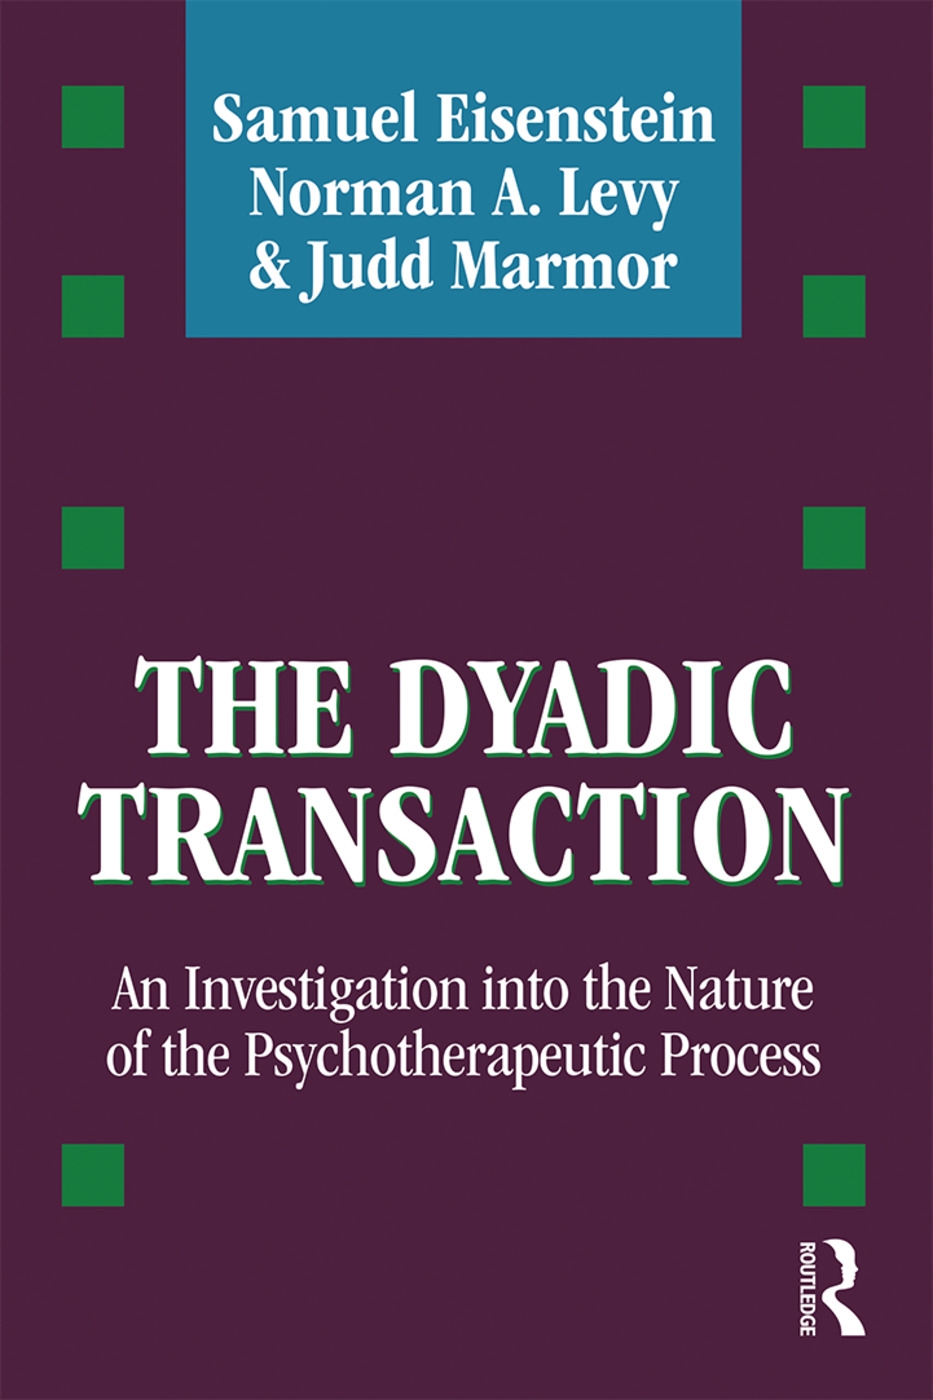 The Dyadic Transaction: An Investigation Into the Nature of the Psychotherapeutic Process